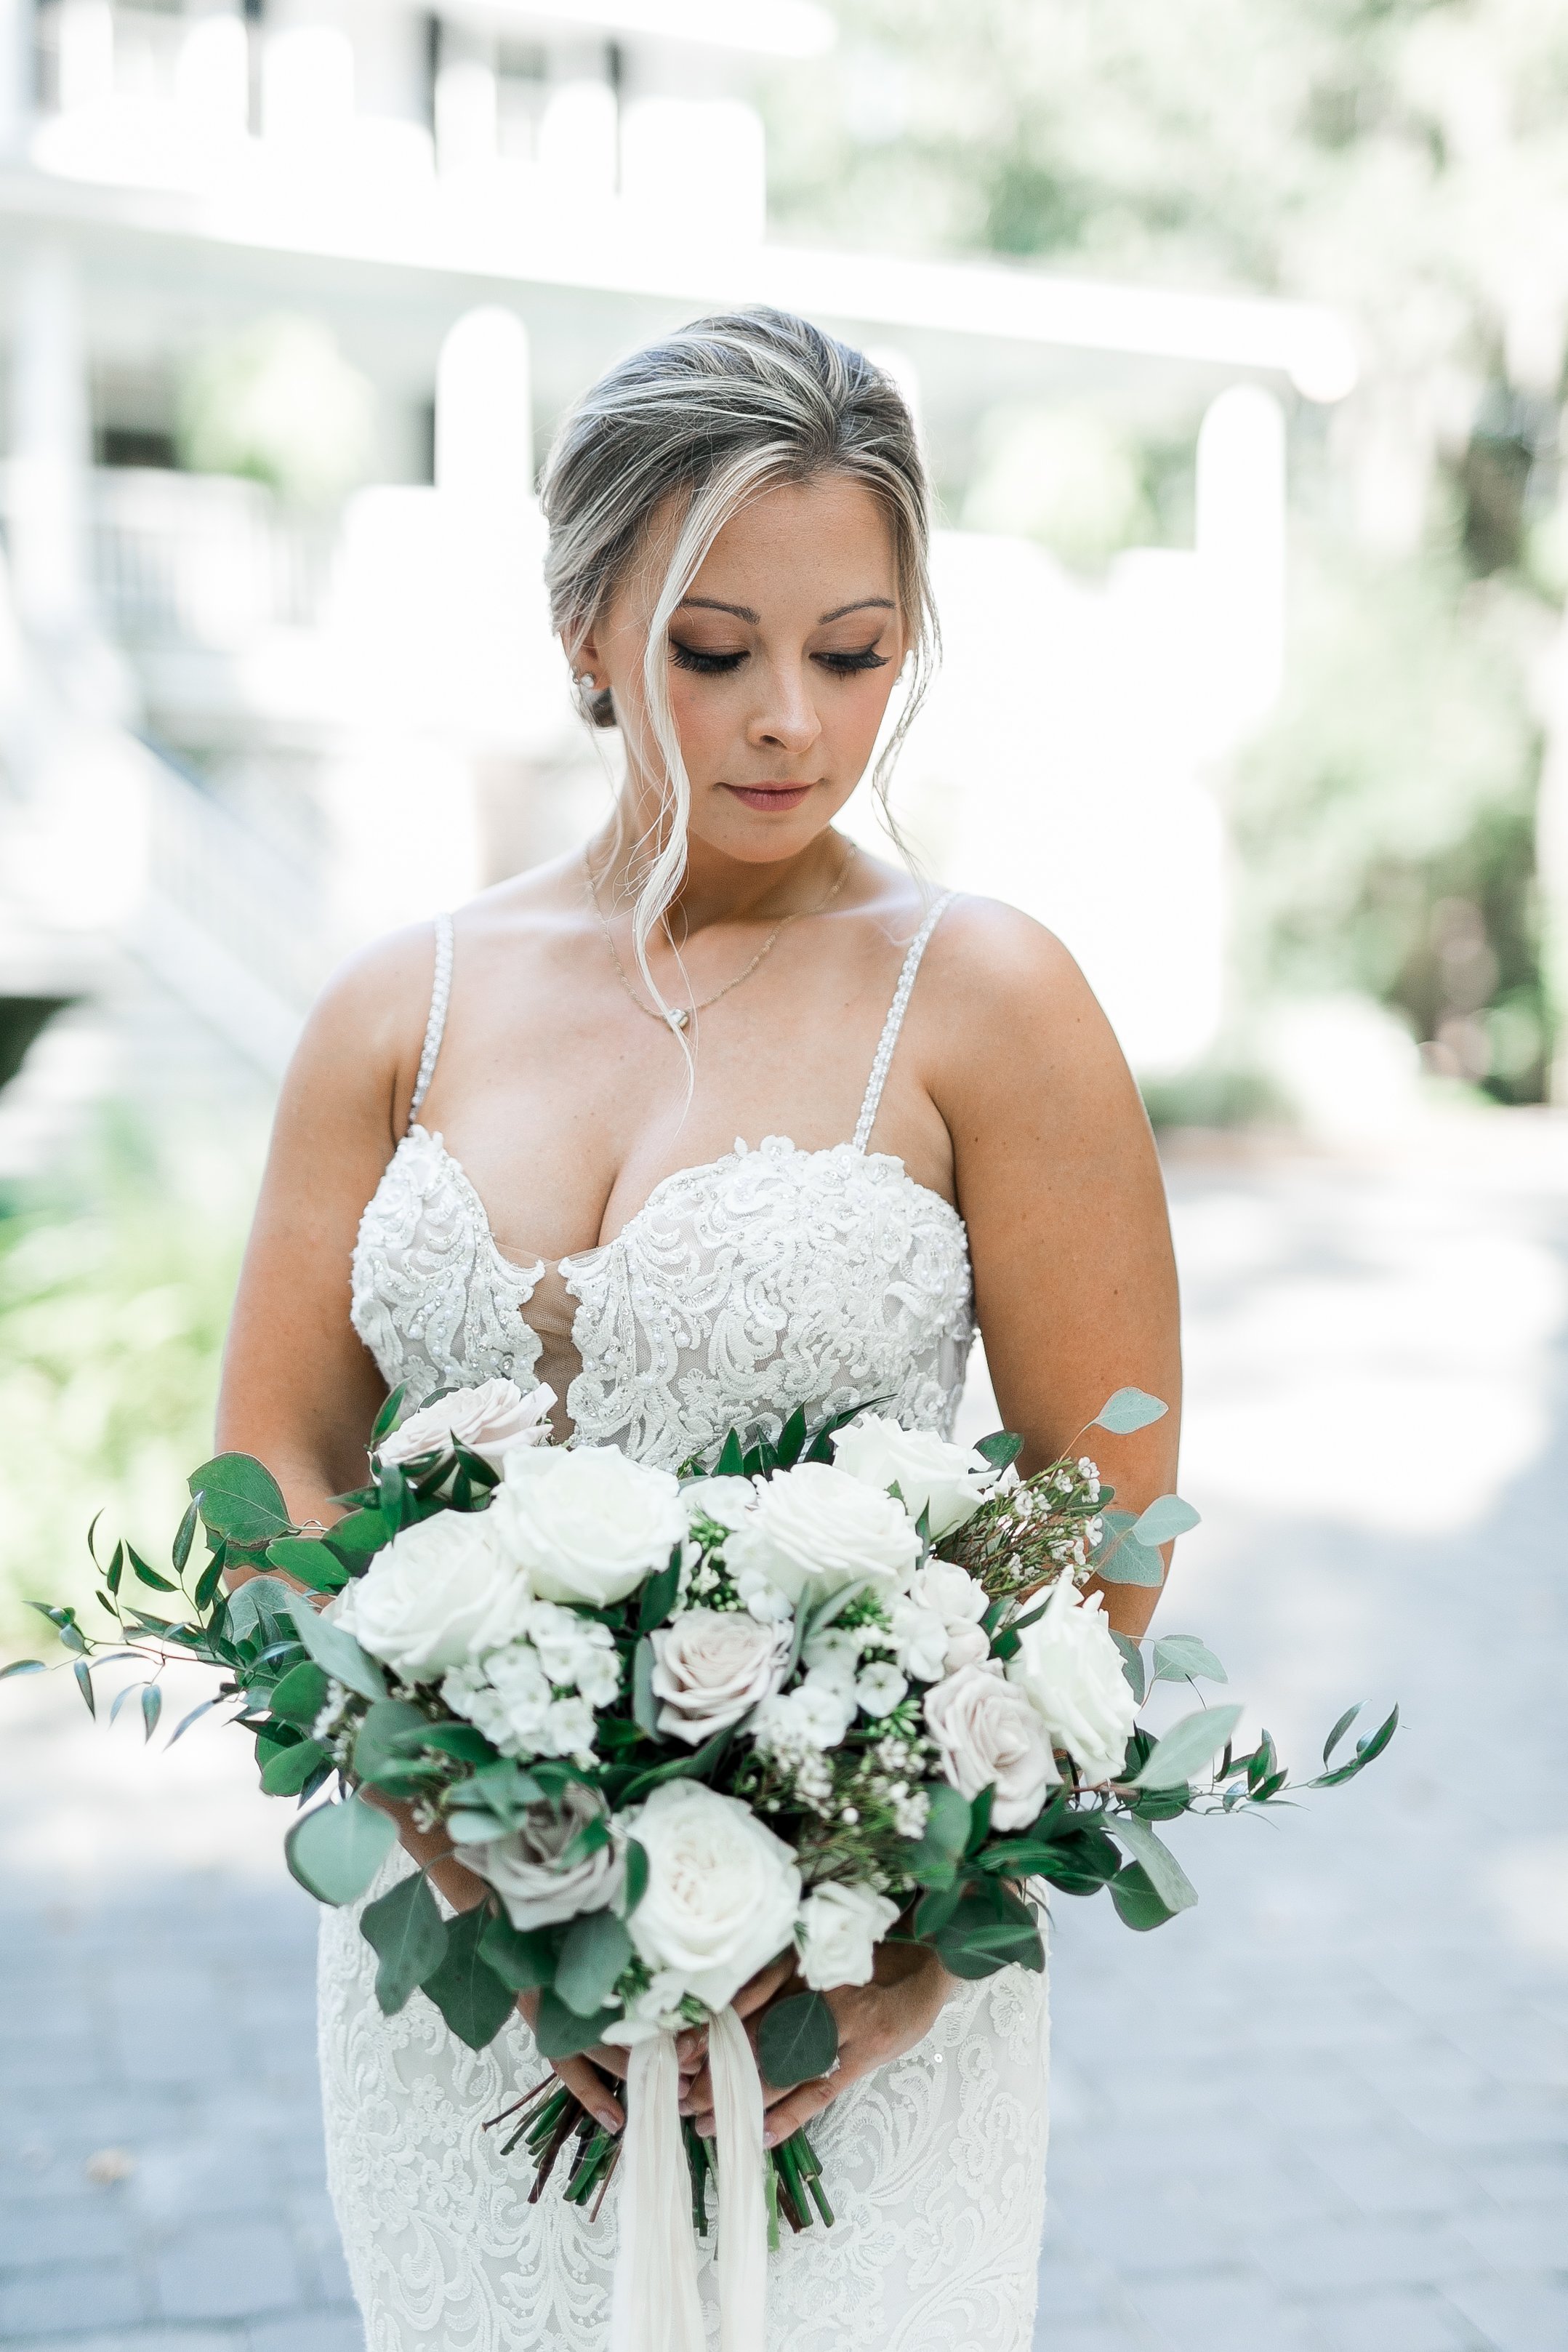 ivory-and-beau-bride-and-florals-wedding-blog-real-bride-real-wedding-savannah-wedding-southern-wedding-mackey-house-alistaire-maggie-sottero-wedding-dress-organic-natural-neutral-wedding-flowers-wedding-florist-savannah-Evan+MerrittWeddingDay_-28.jpg